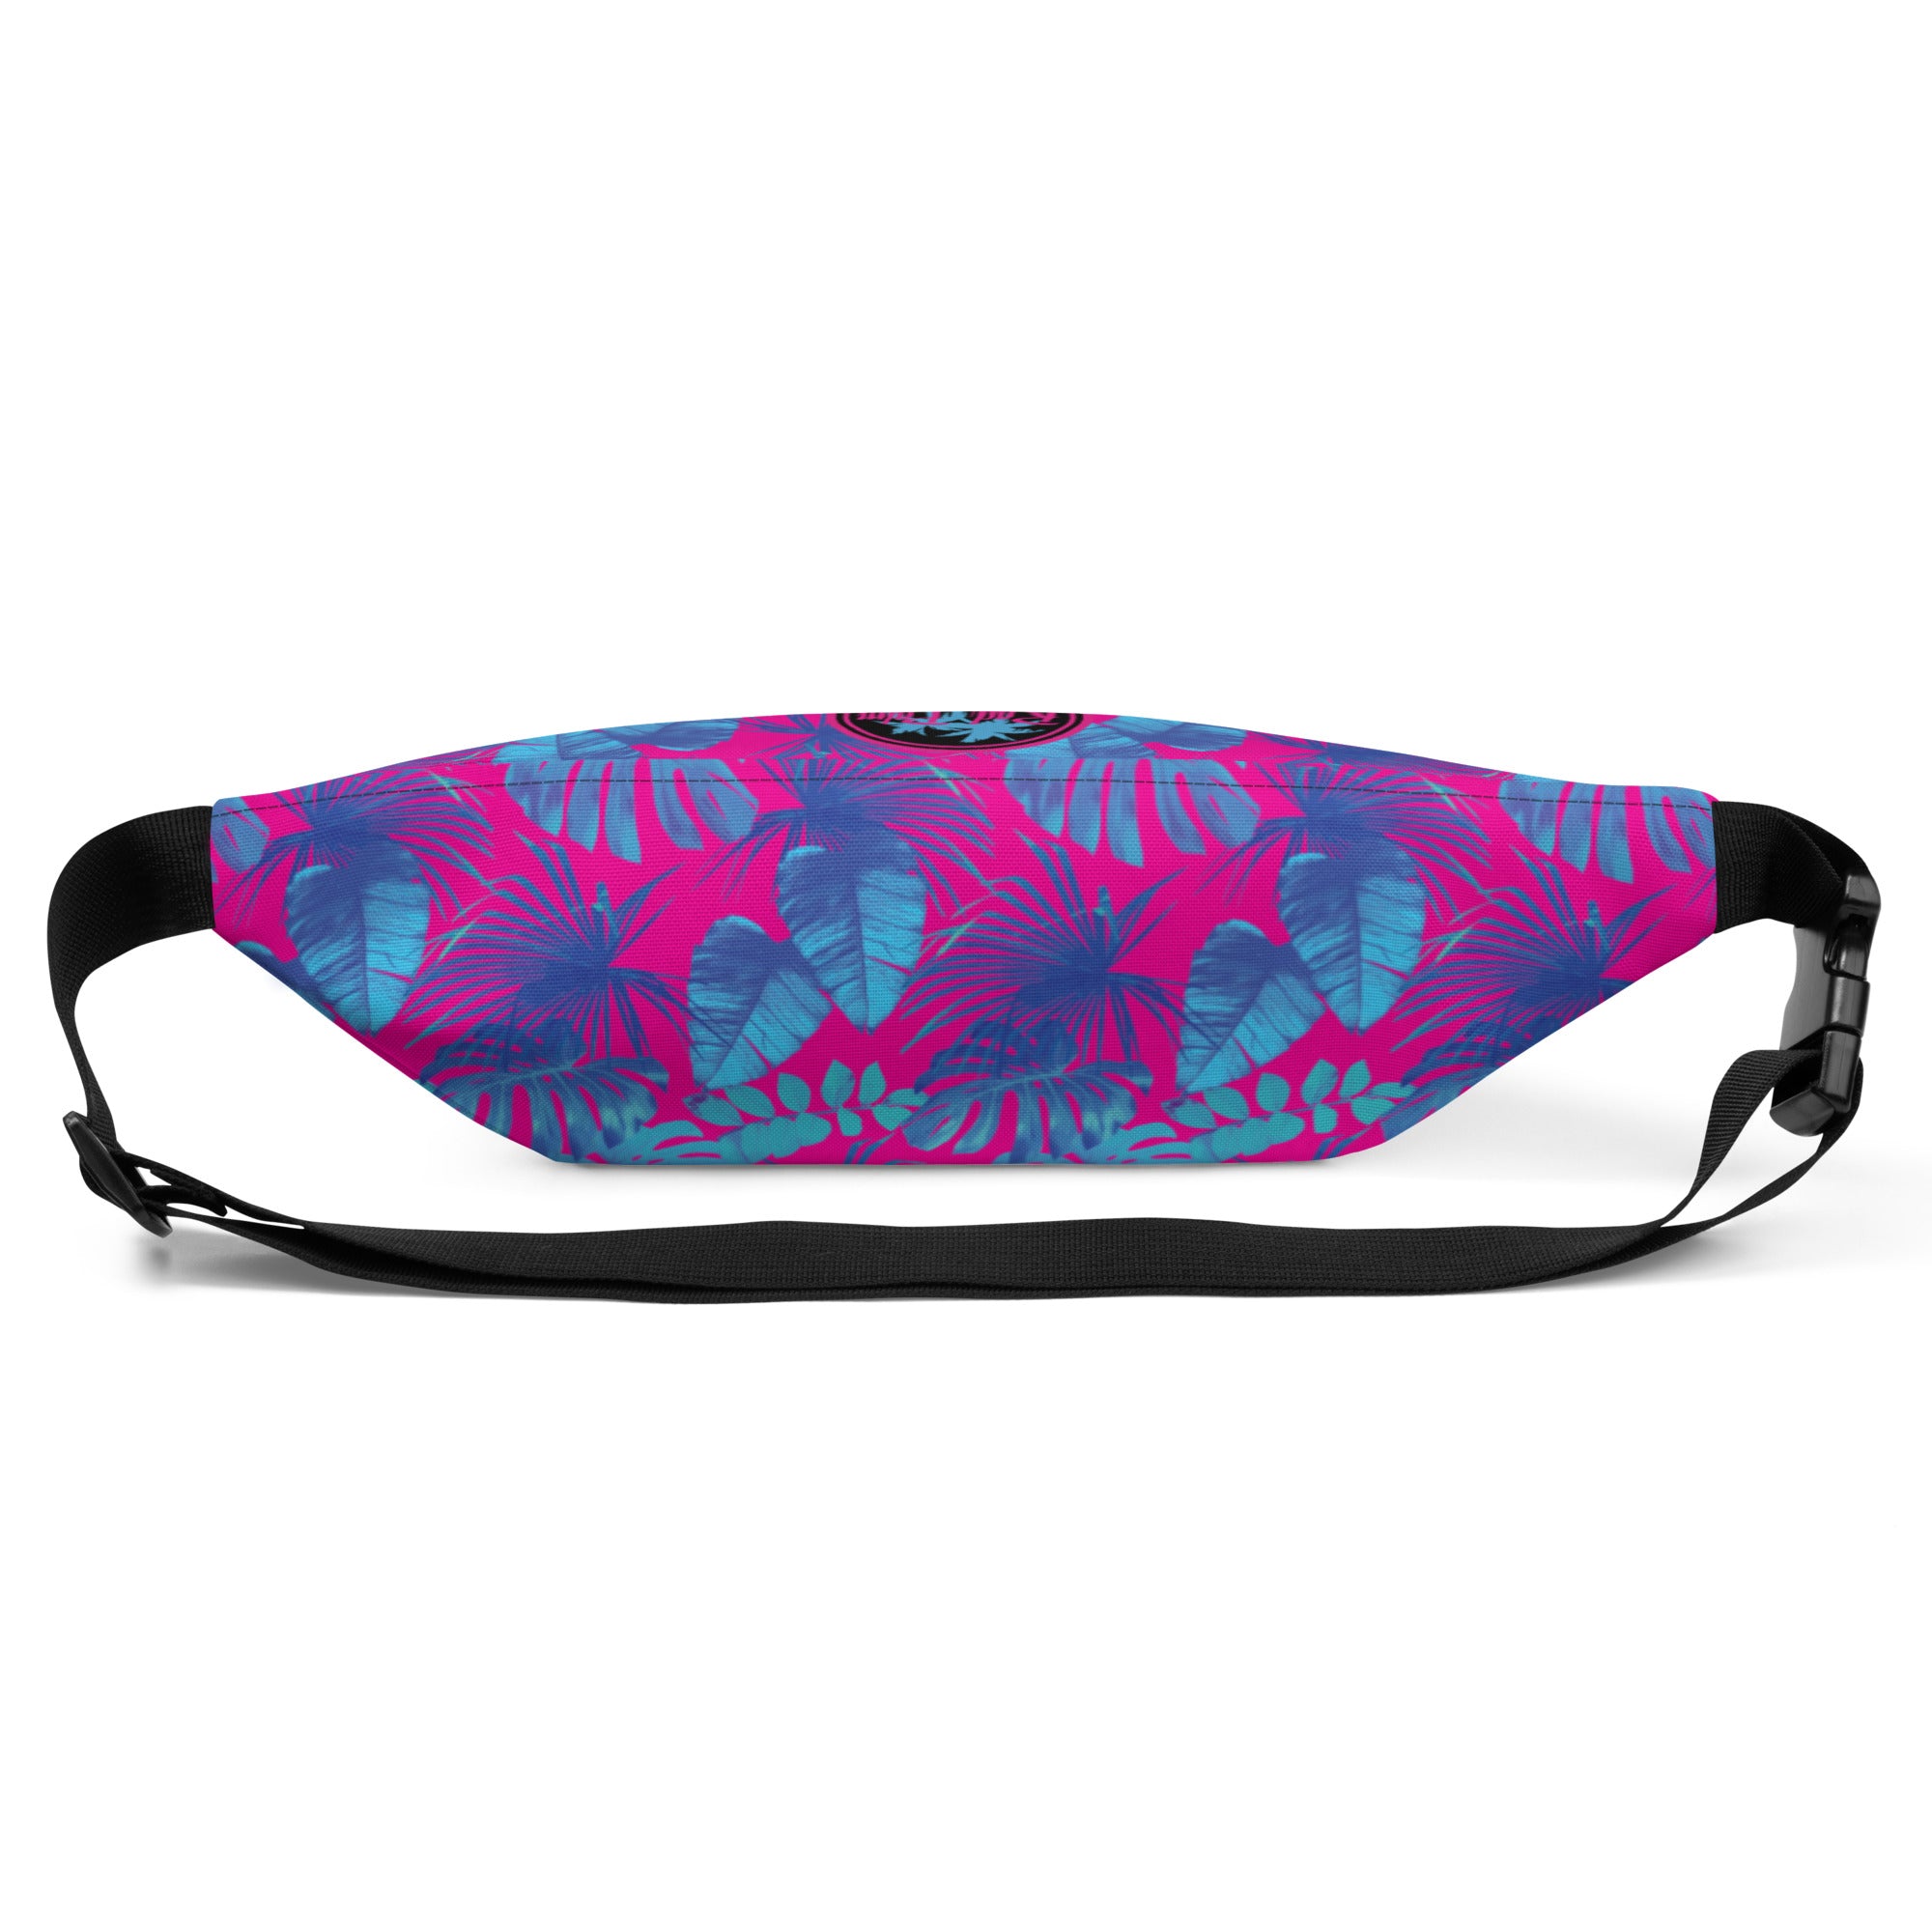 The Zack Fanny Pack